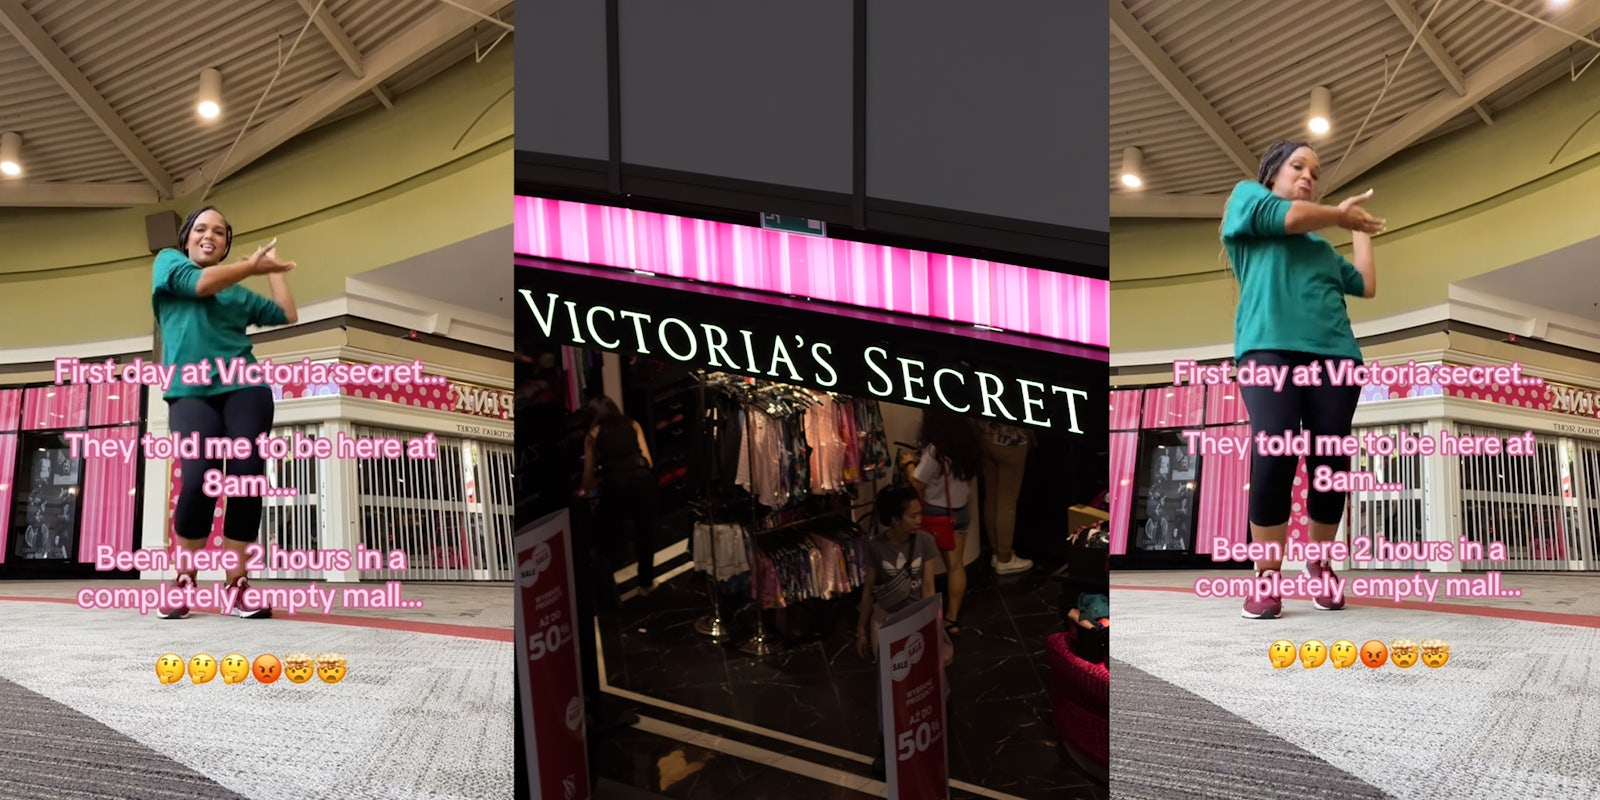 New Victoria’s Secret employee shows up to first day on time at 8am.